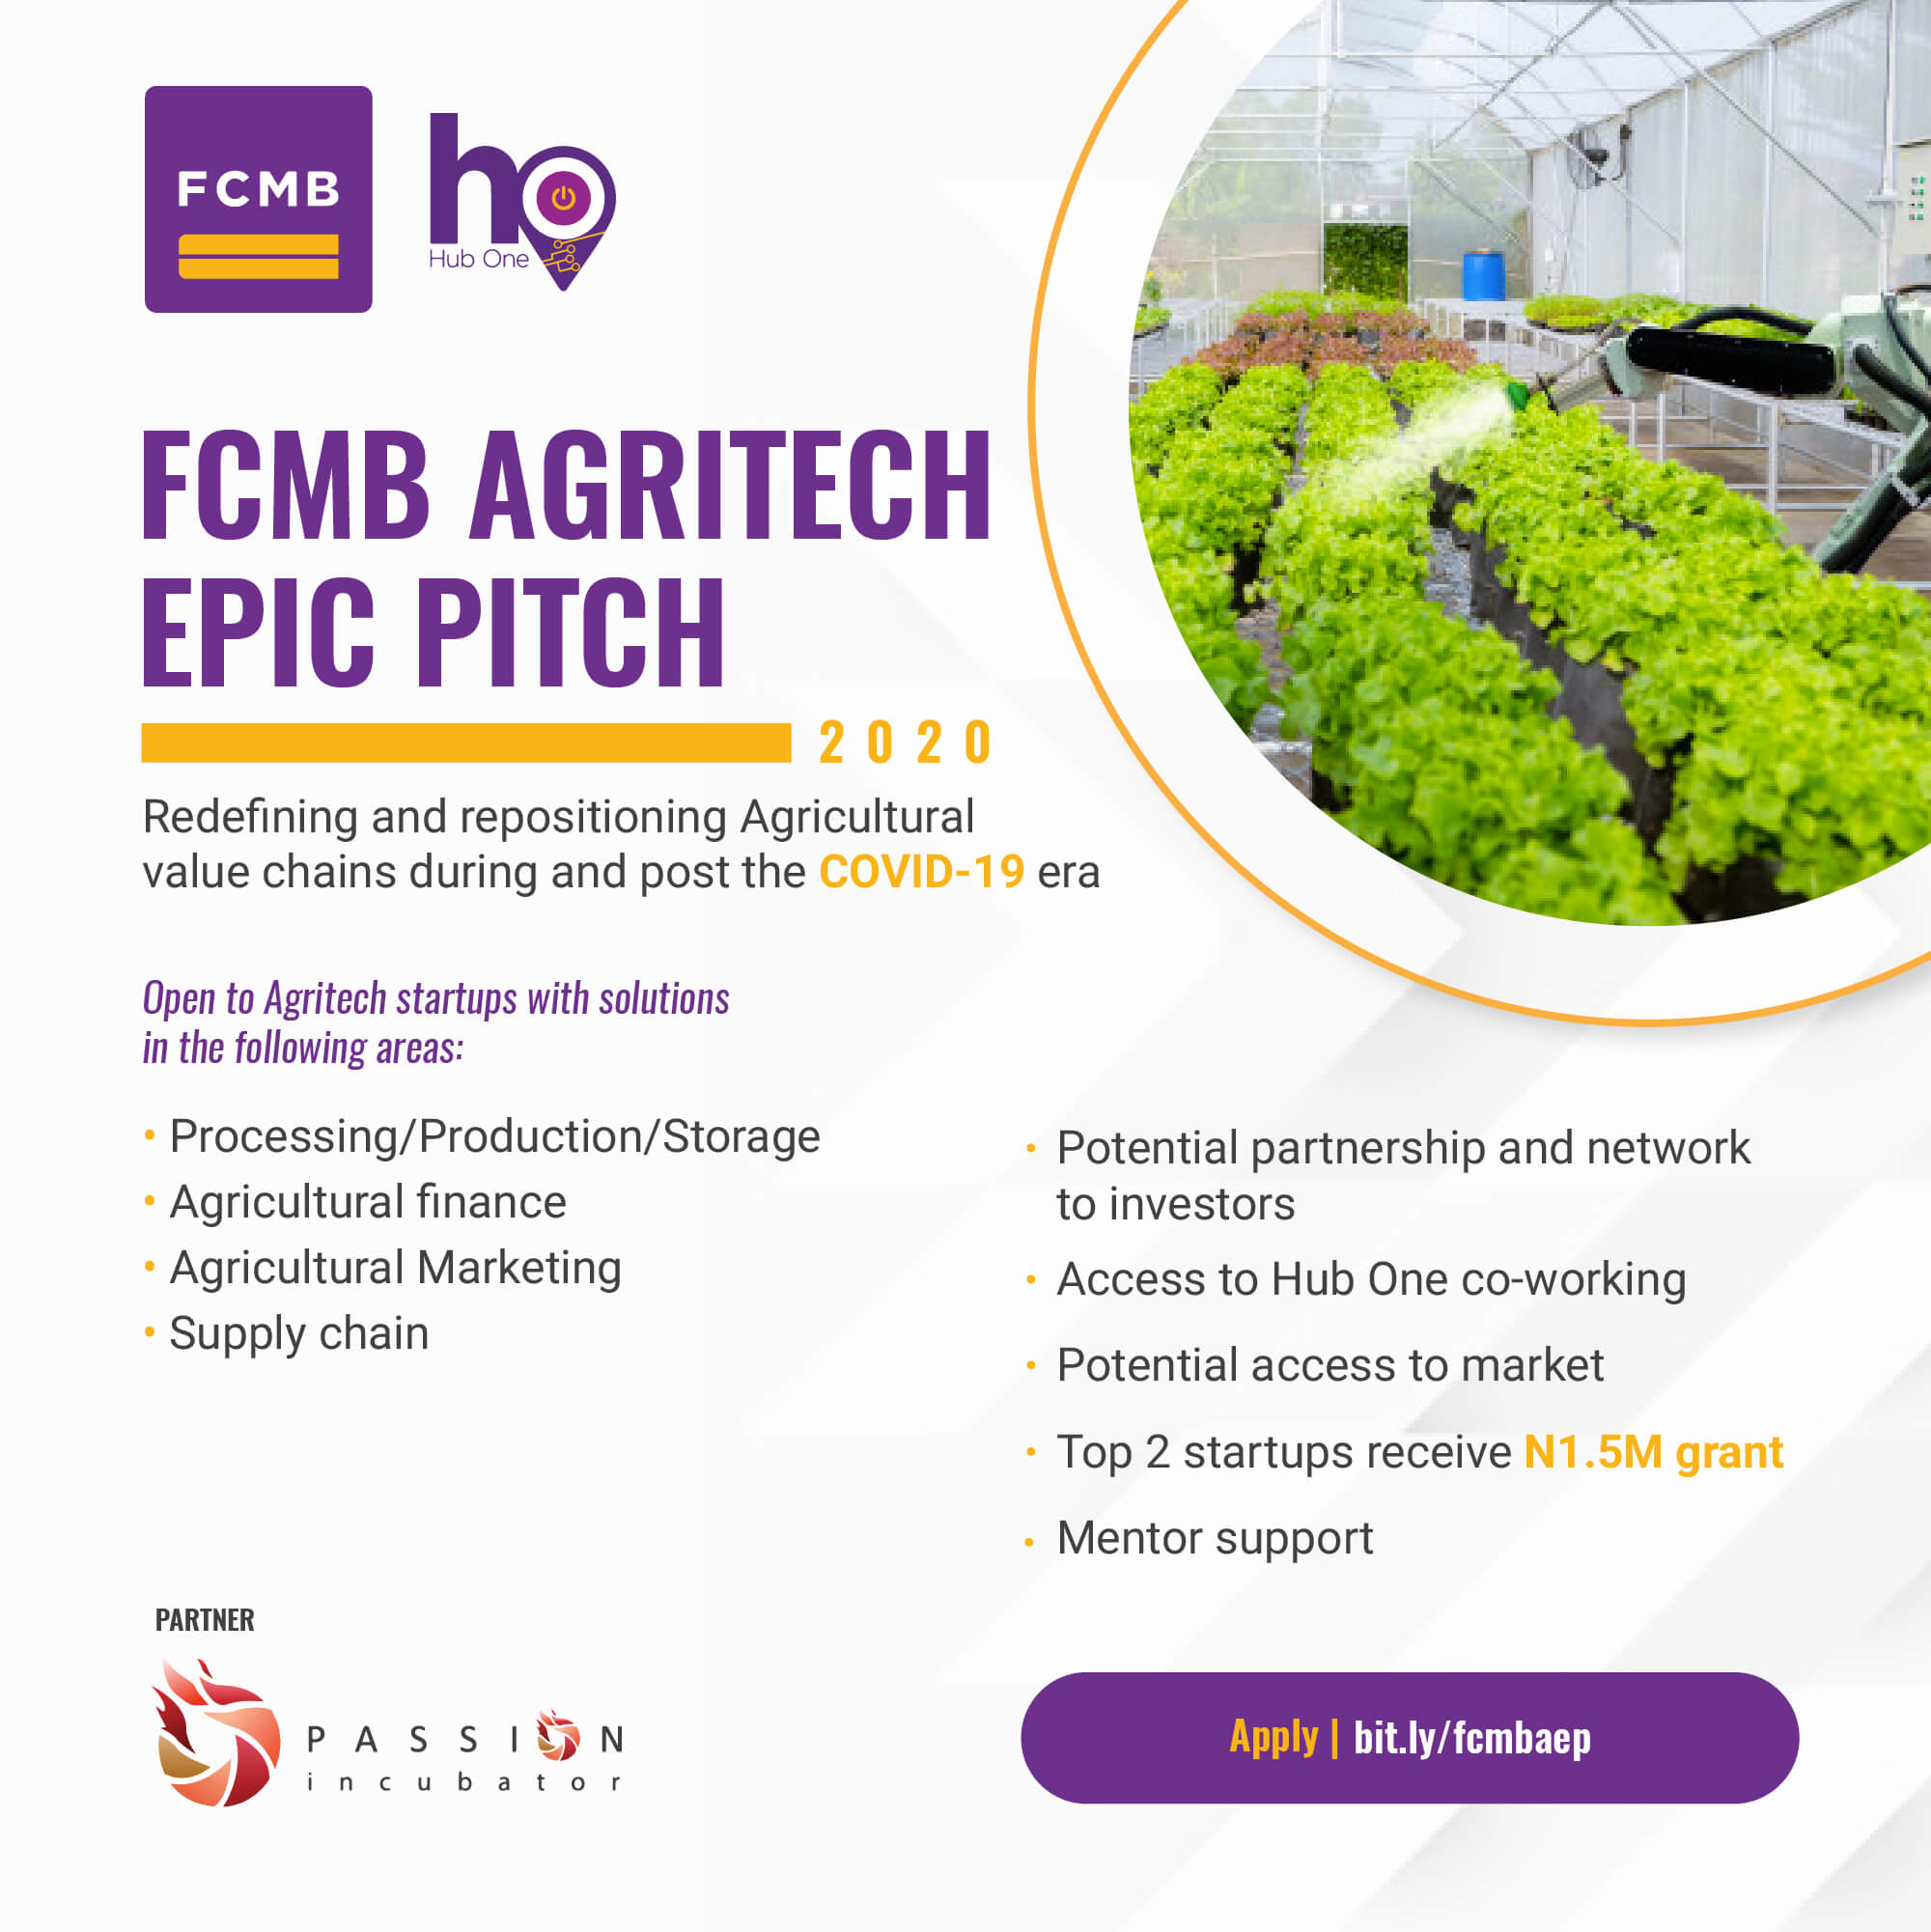 Agritech EPIC Pitch by FCMB and Passion Incubator